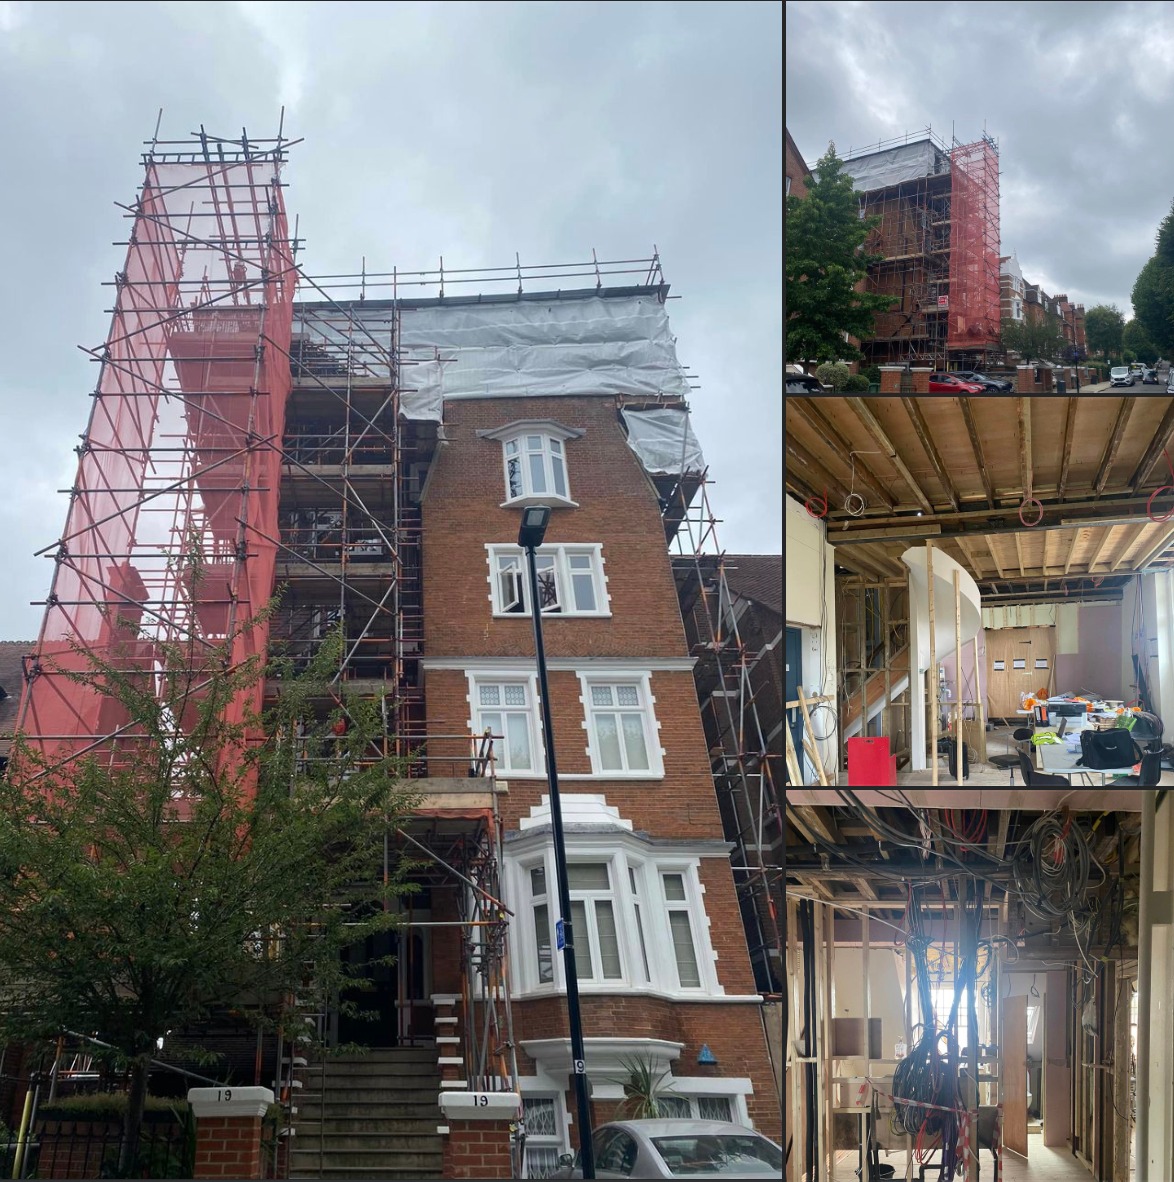 Blue Light Safety on another London project via a few site visits finishing off with this massive duplex flat in leafy Hampstead. Coverage throughout. #automist #watermist #firesuppression bluelightsafety.co.uk